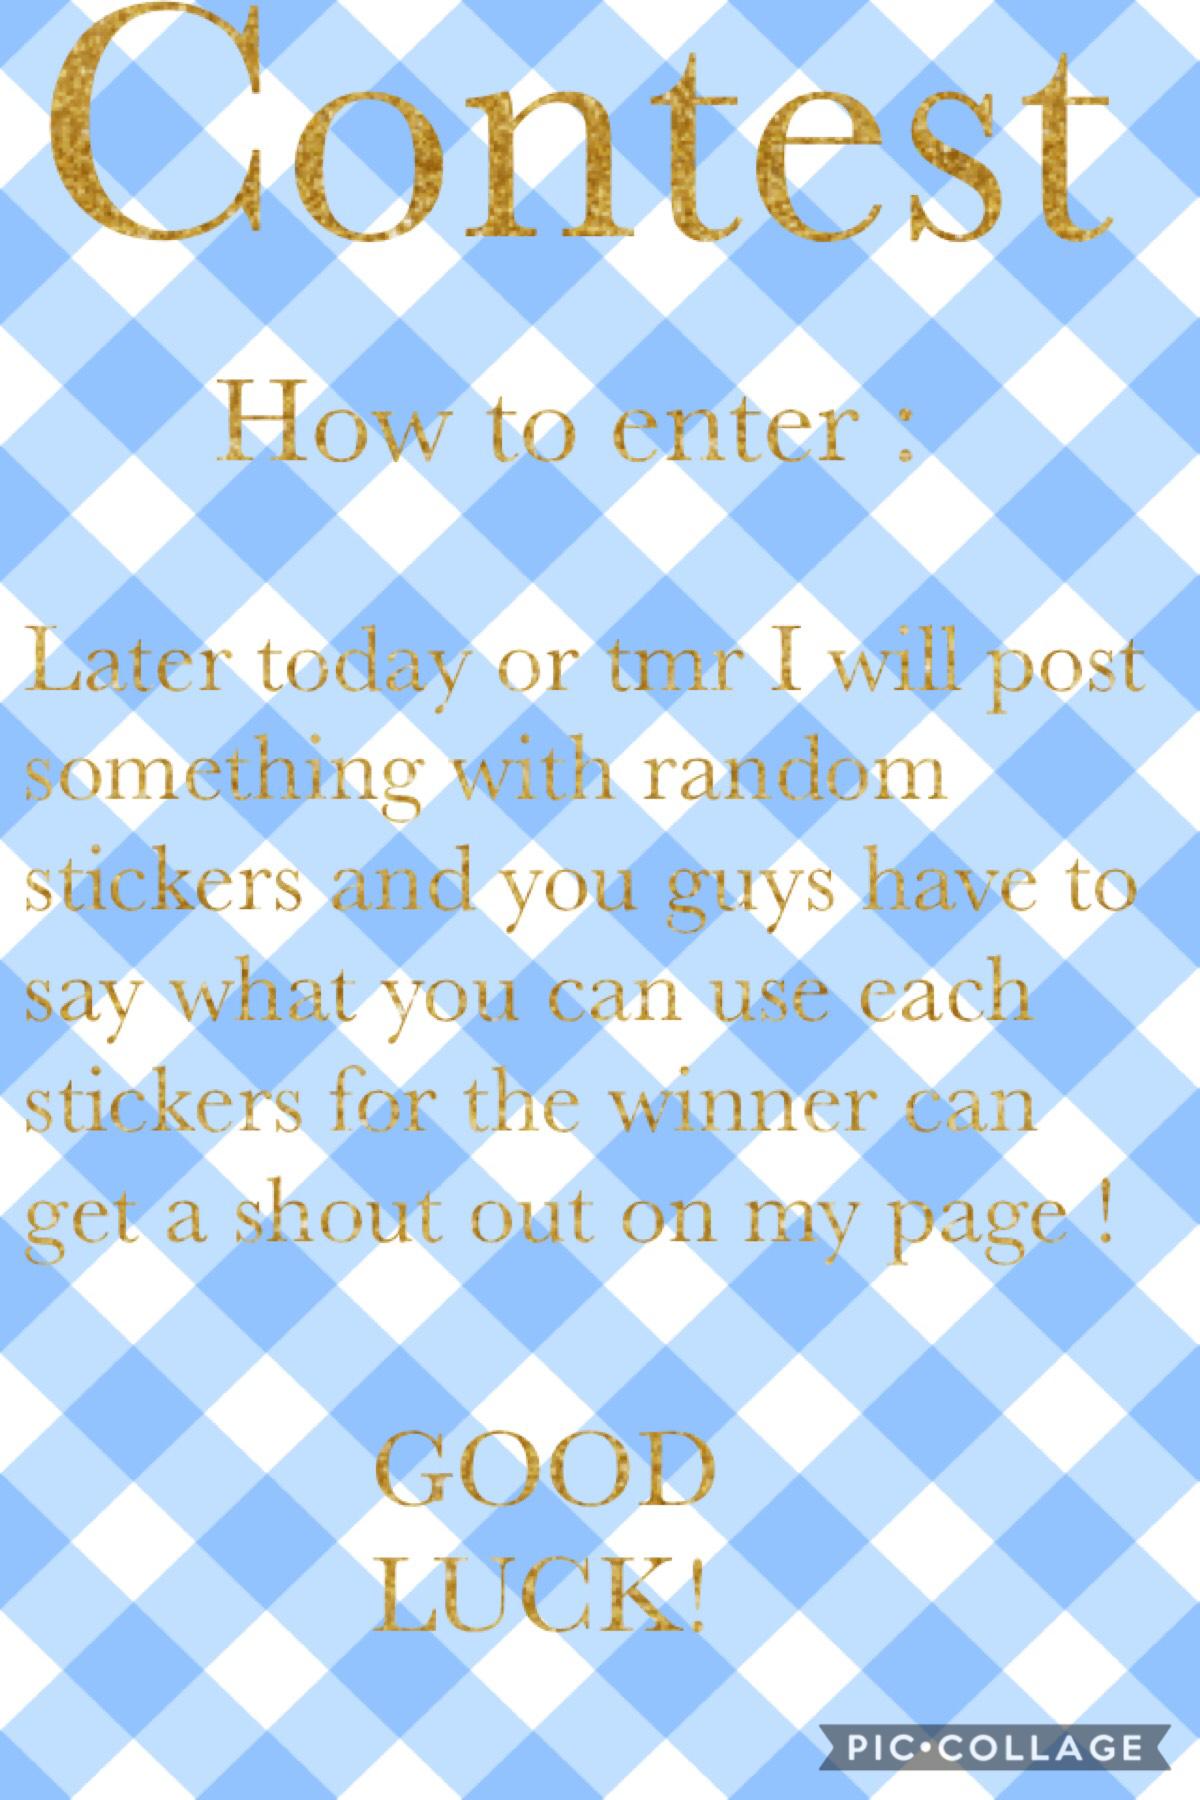 Having a contest look at how you can enter oh also if you read this comment OMG in the comments I doubt you’ll read this but I you do you’ll have a higher chance of winning ! 